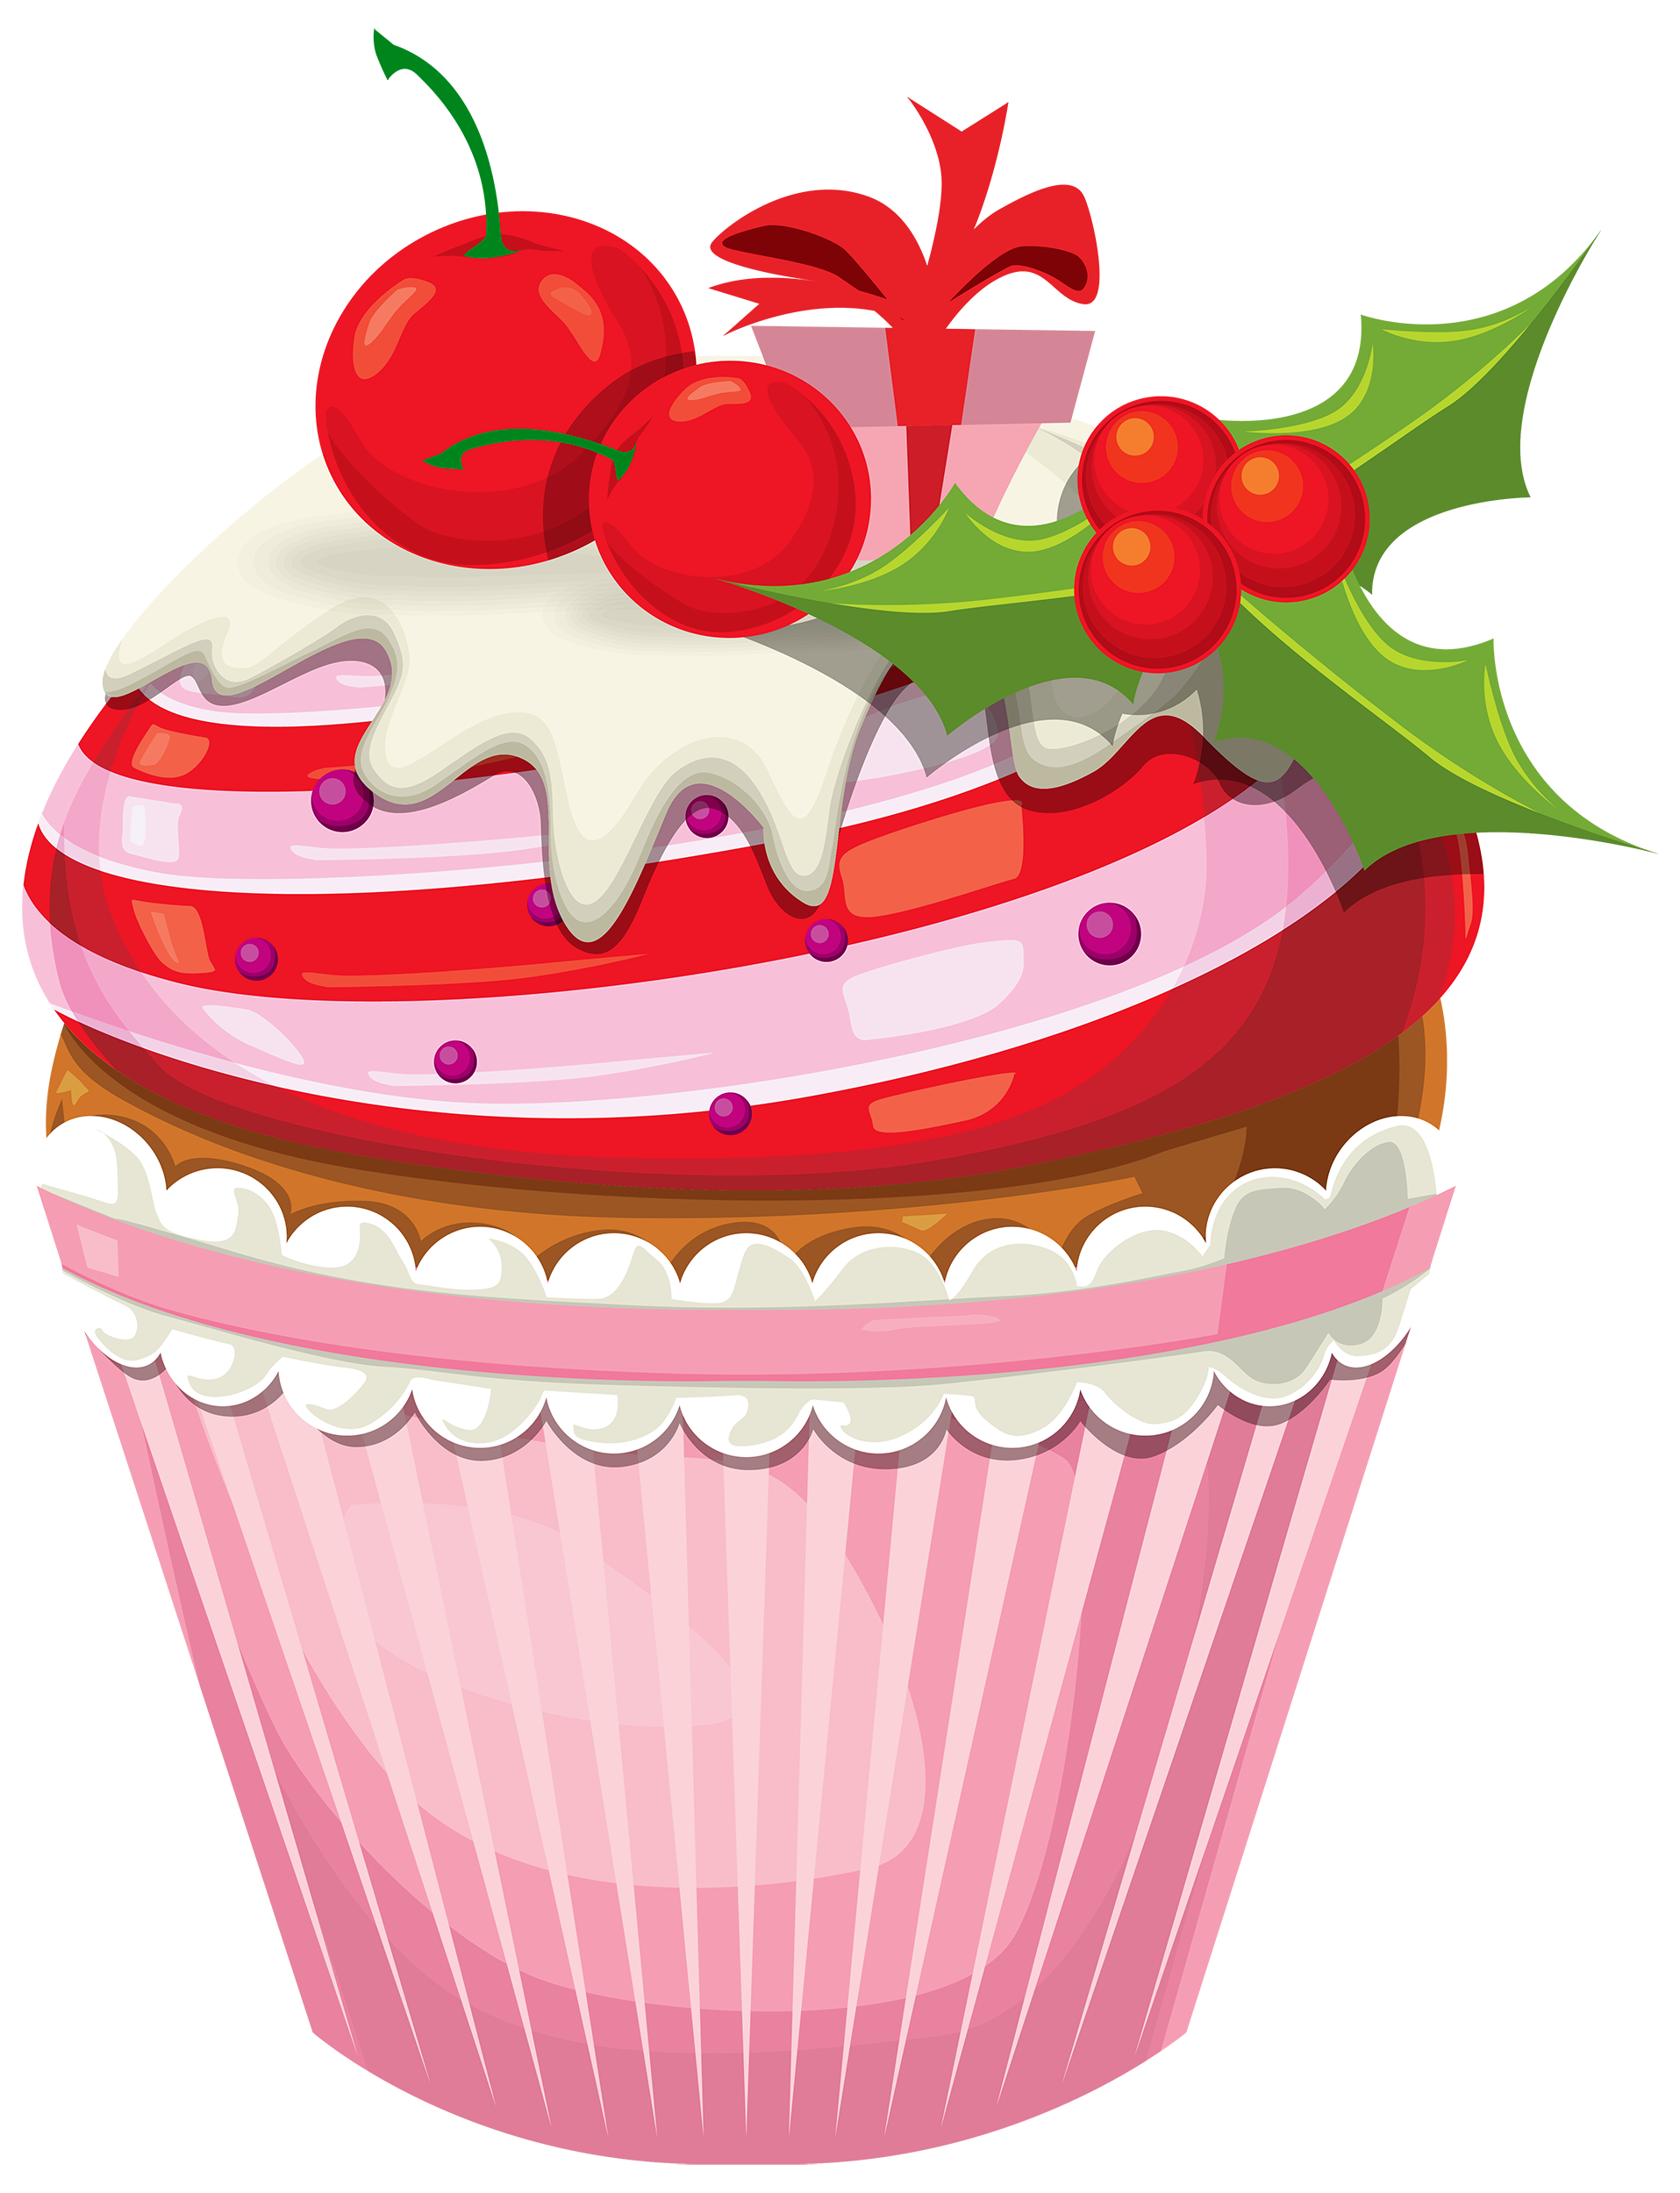 Cakes PNG Images, Cakes Clipart Free Download